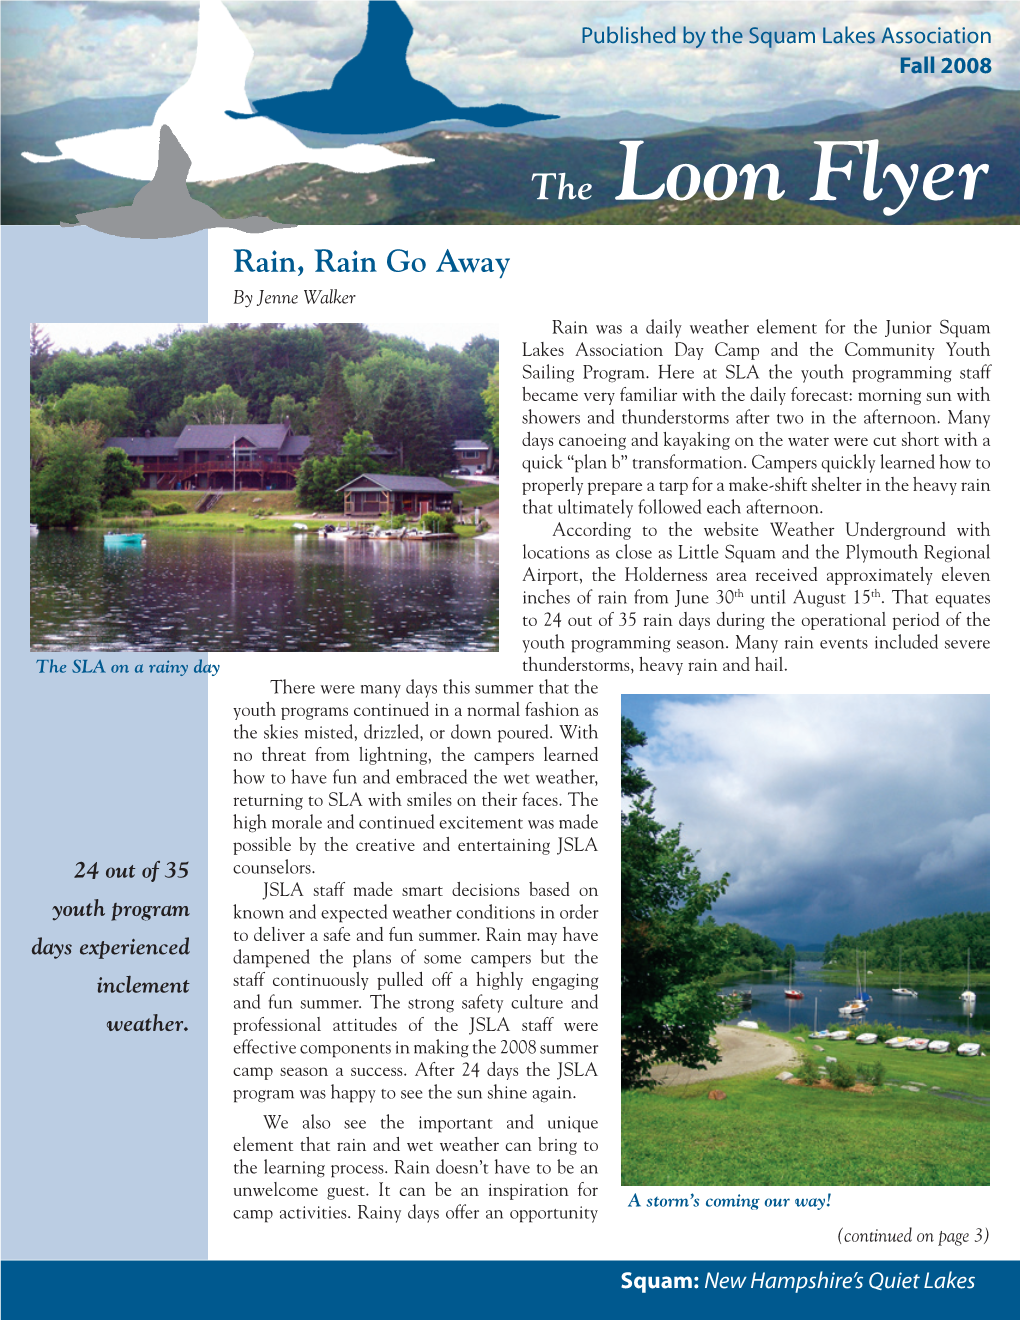 Loon Flyer Rain, Rain Go Away by Jenne Walker Rain Was a Daily Weather Element for the Junior Squam Lakes Association Day Camp and the Community Youth Sailing Program